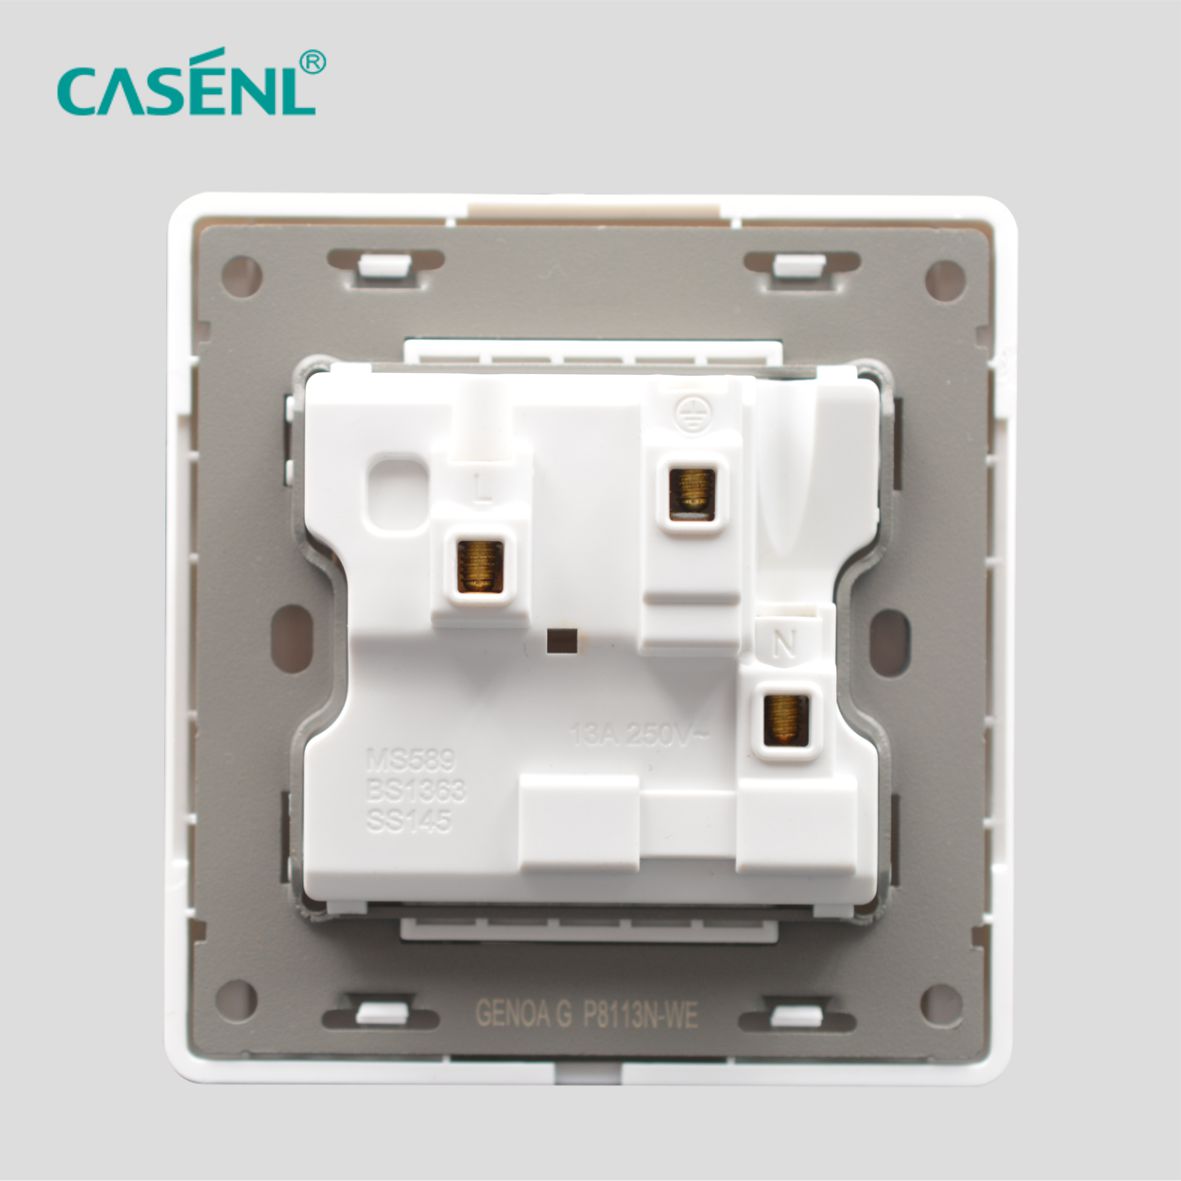 13A BS switch socket with lamp